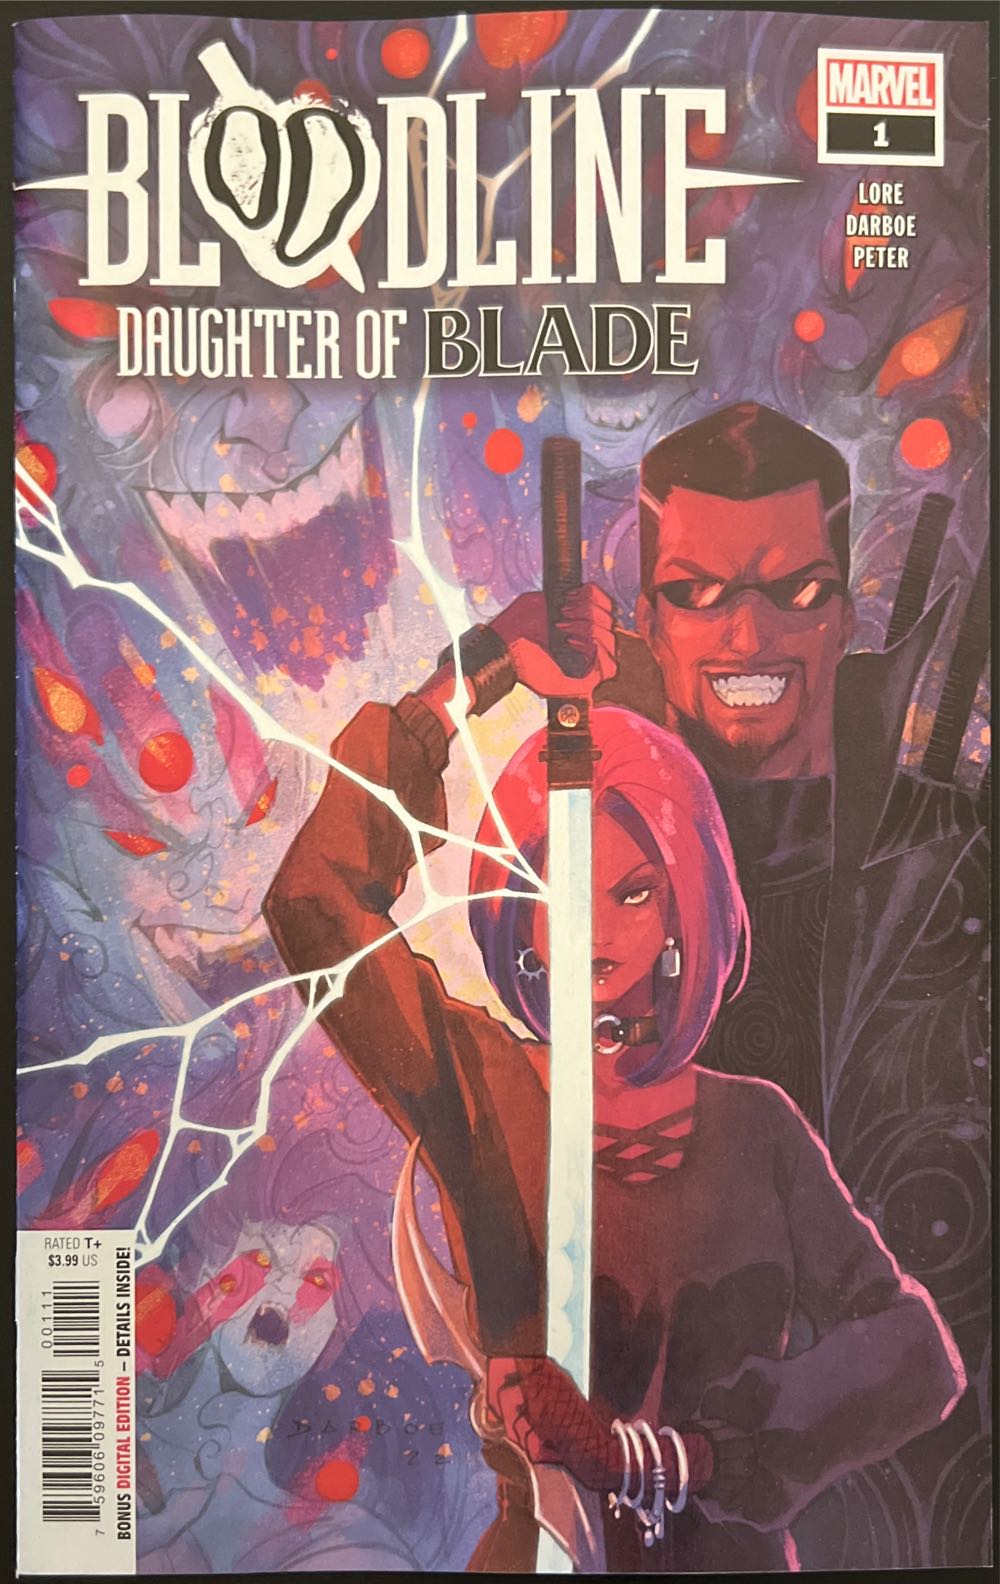 Bloodline: Daughter Of Blade - Marvel Comics (1 - Apr 2023) comic book collectible [Barcode 75960609771500111] - Main Image 1